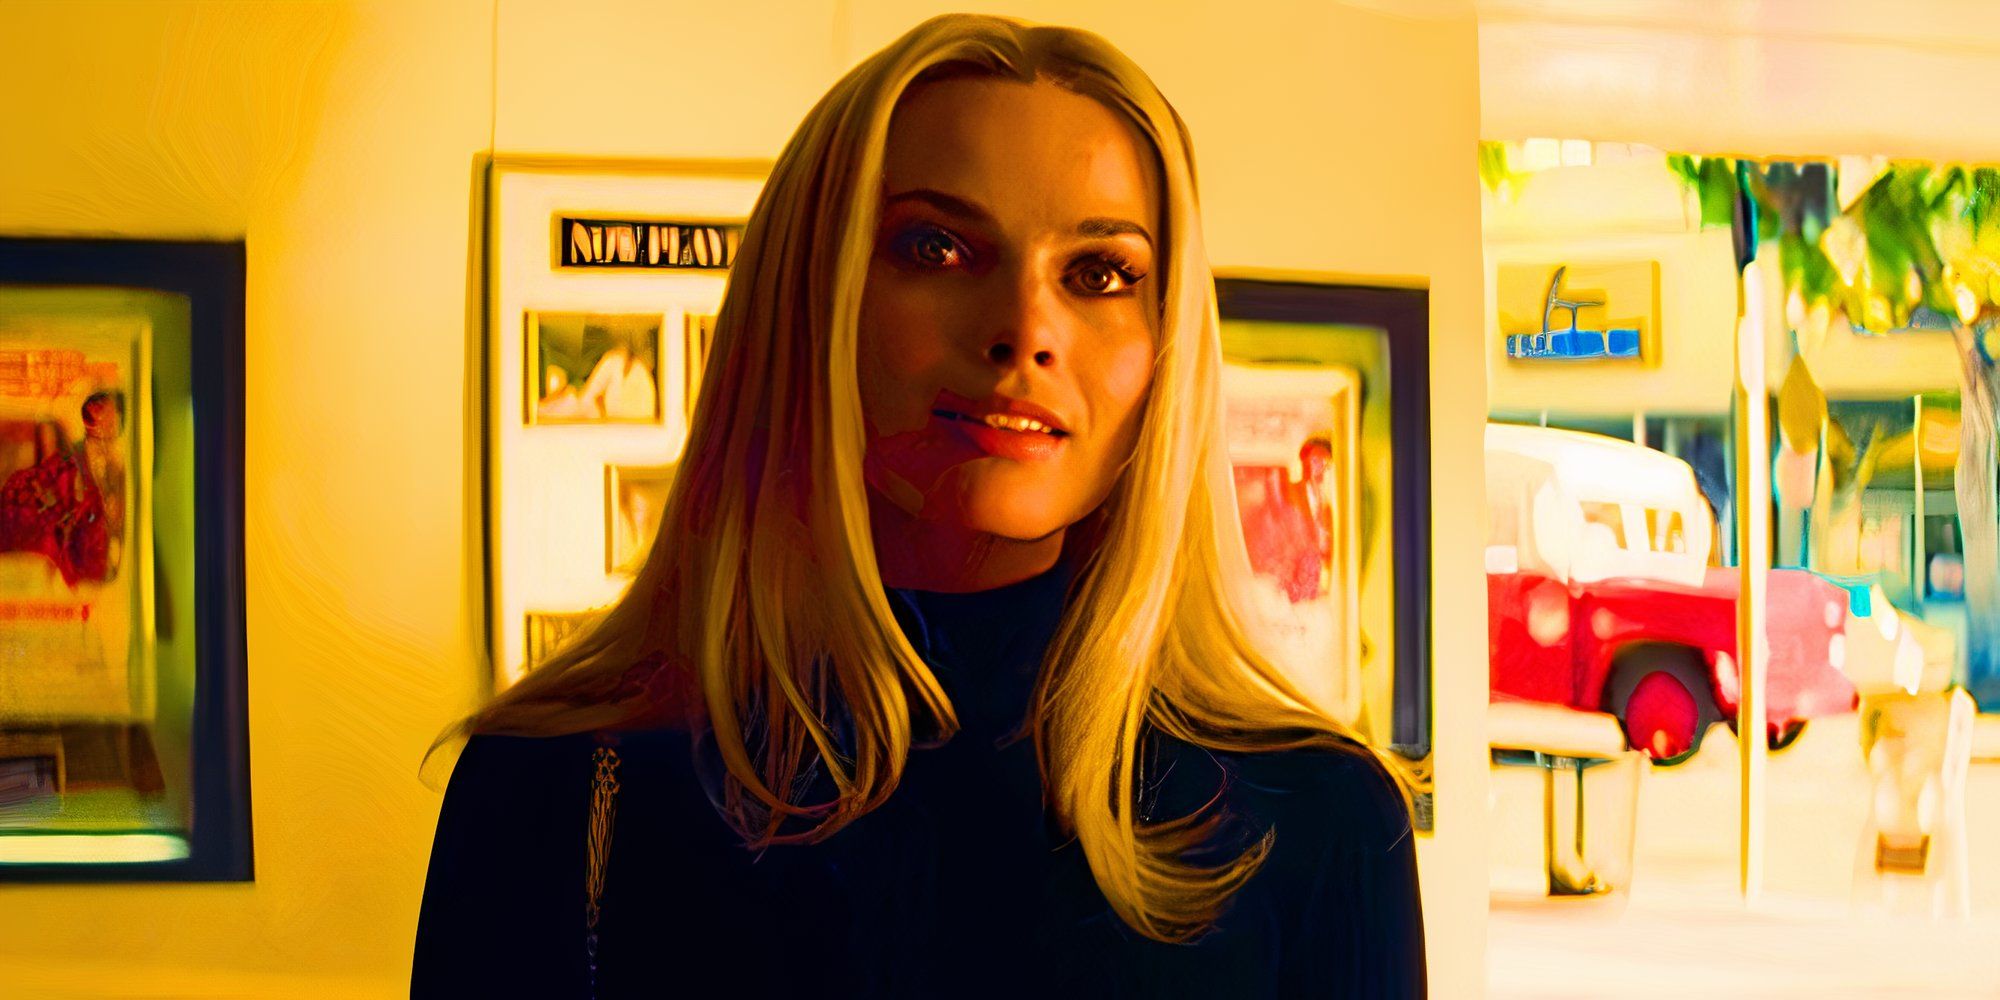 Margot Robbie in Once Upon a Time in Hollywood looking thoughtful